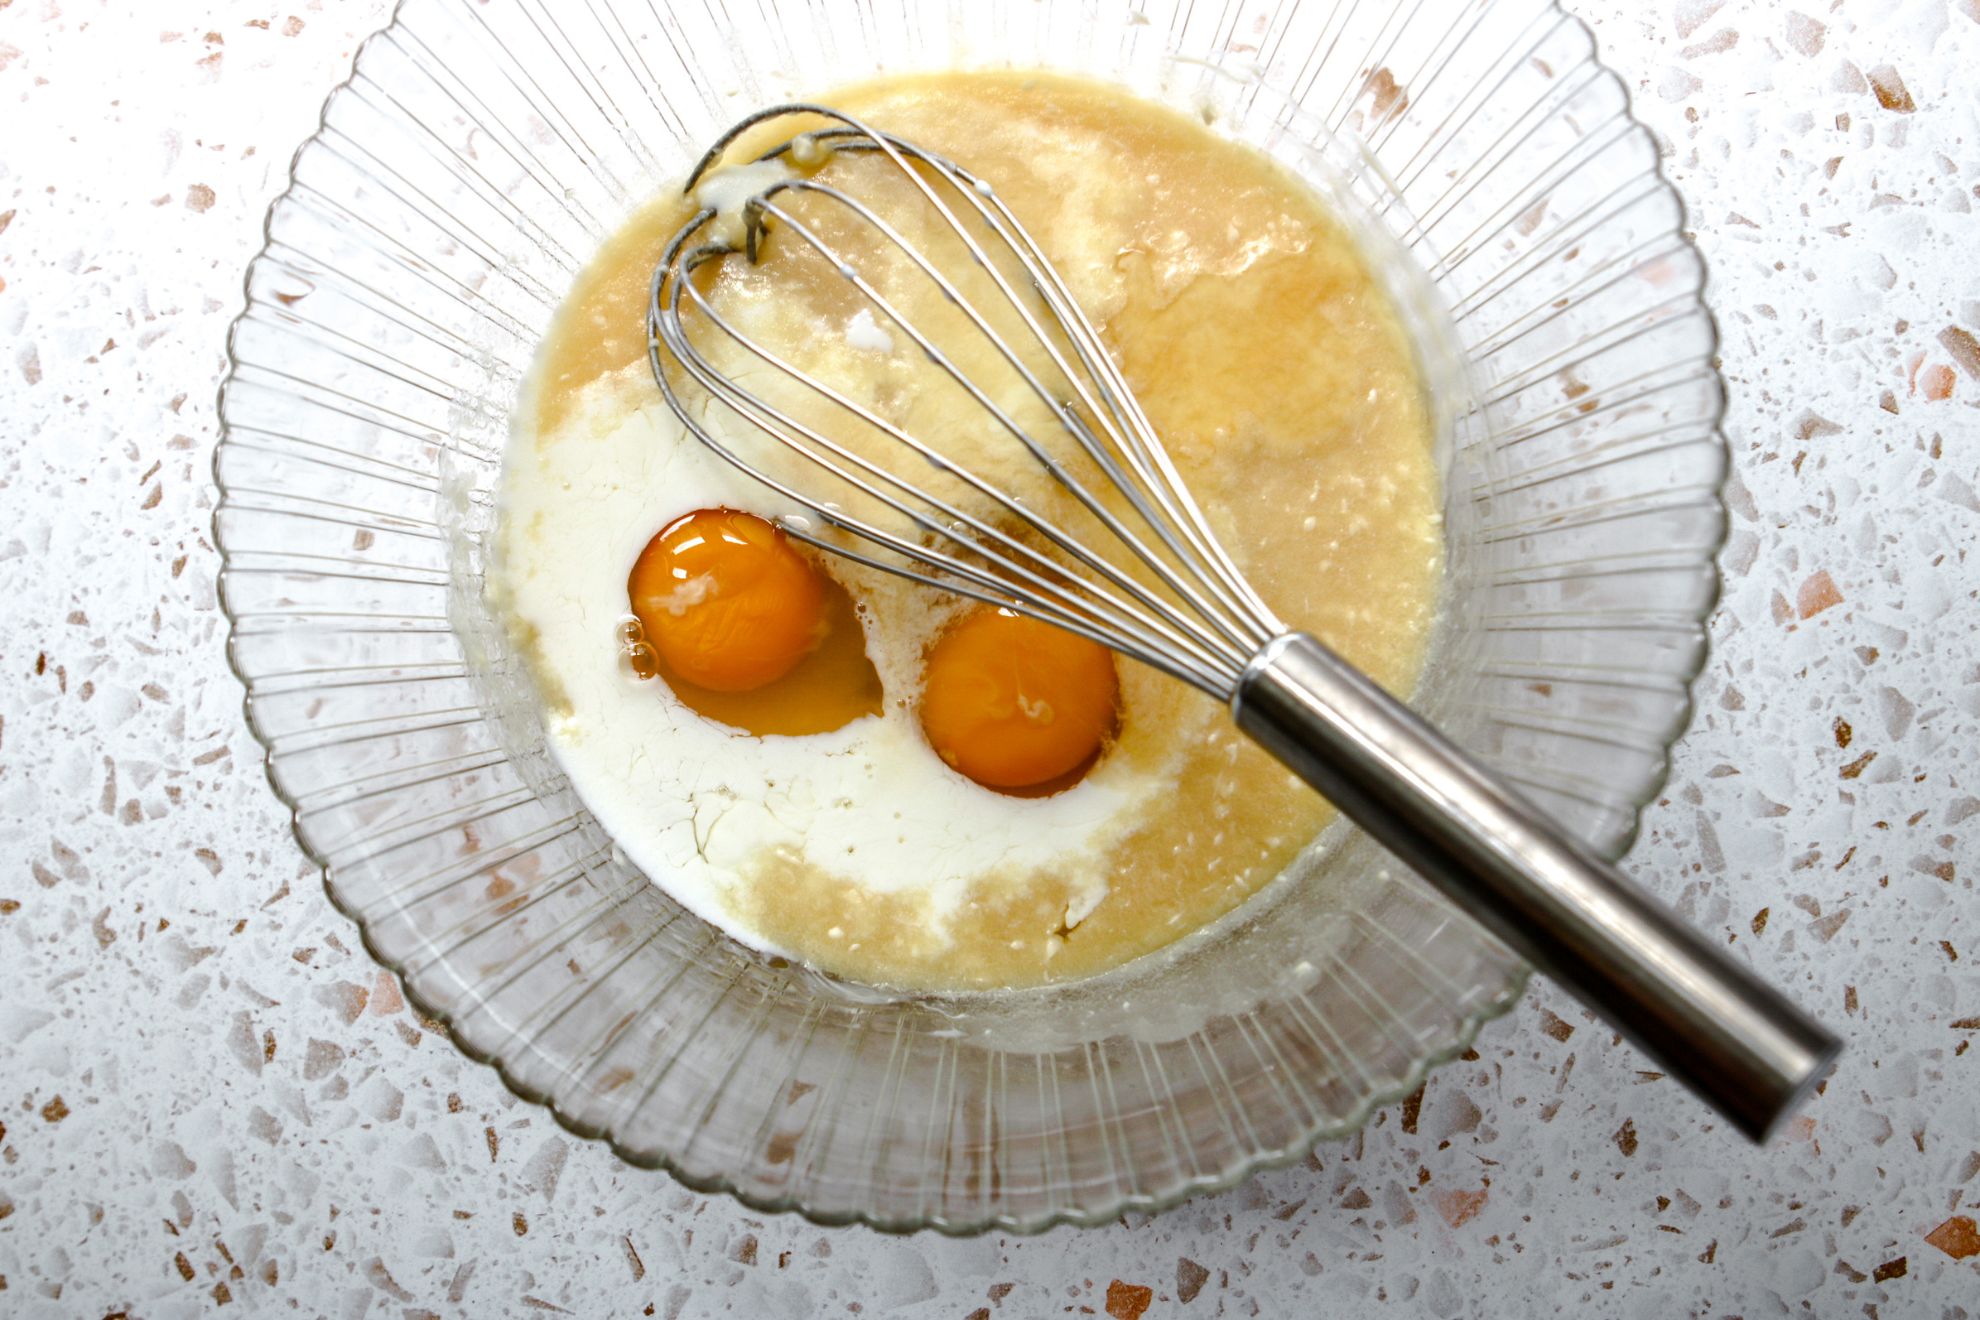 This is an overhead horizontal image of a large glass bowl with scalloped edges on a white terrazzo surface. In the bowl or wet ingredients including milk and eggs. A silver whisk is in the bowl with the silver handle leaning against the side of the bowl pointing to the bottom right corner.